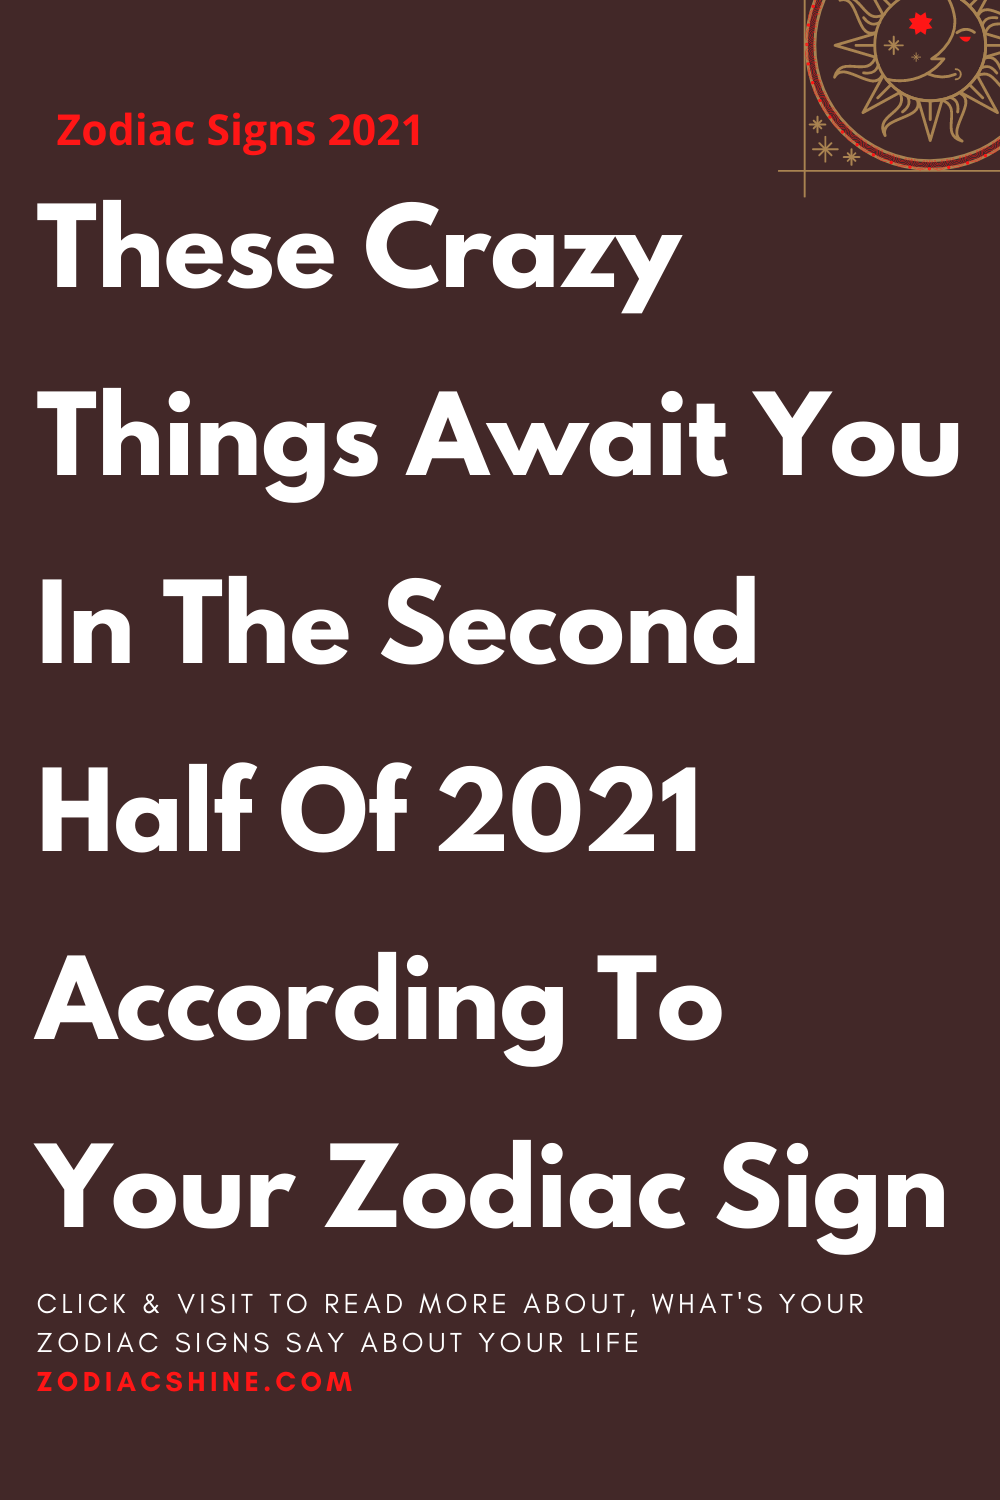 These Crazy Things Await You In The Second Half Of 2021 According To Your Zodiac Sign